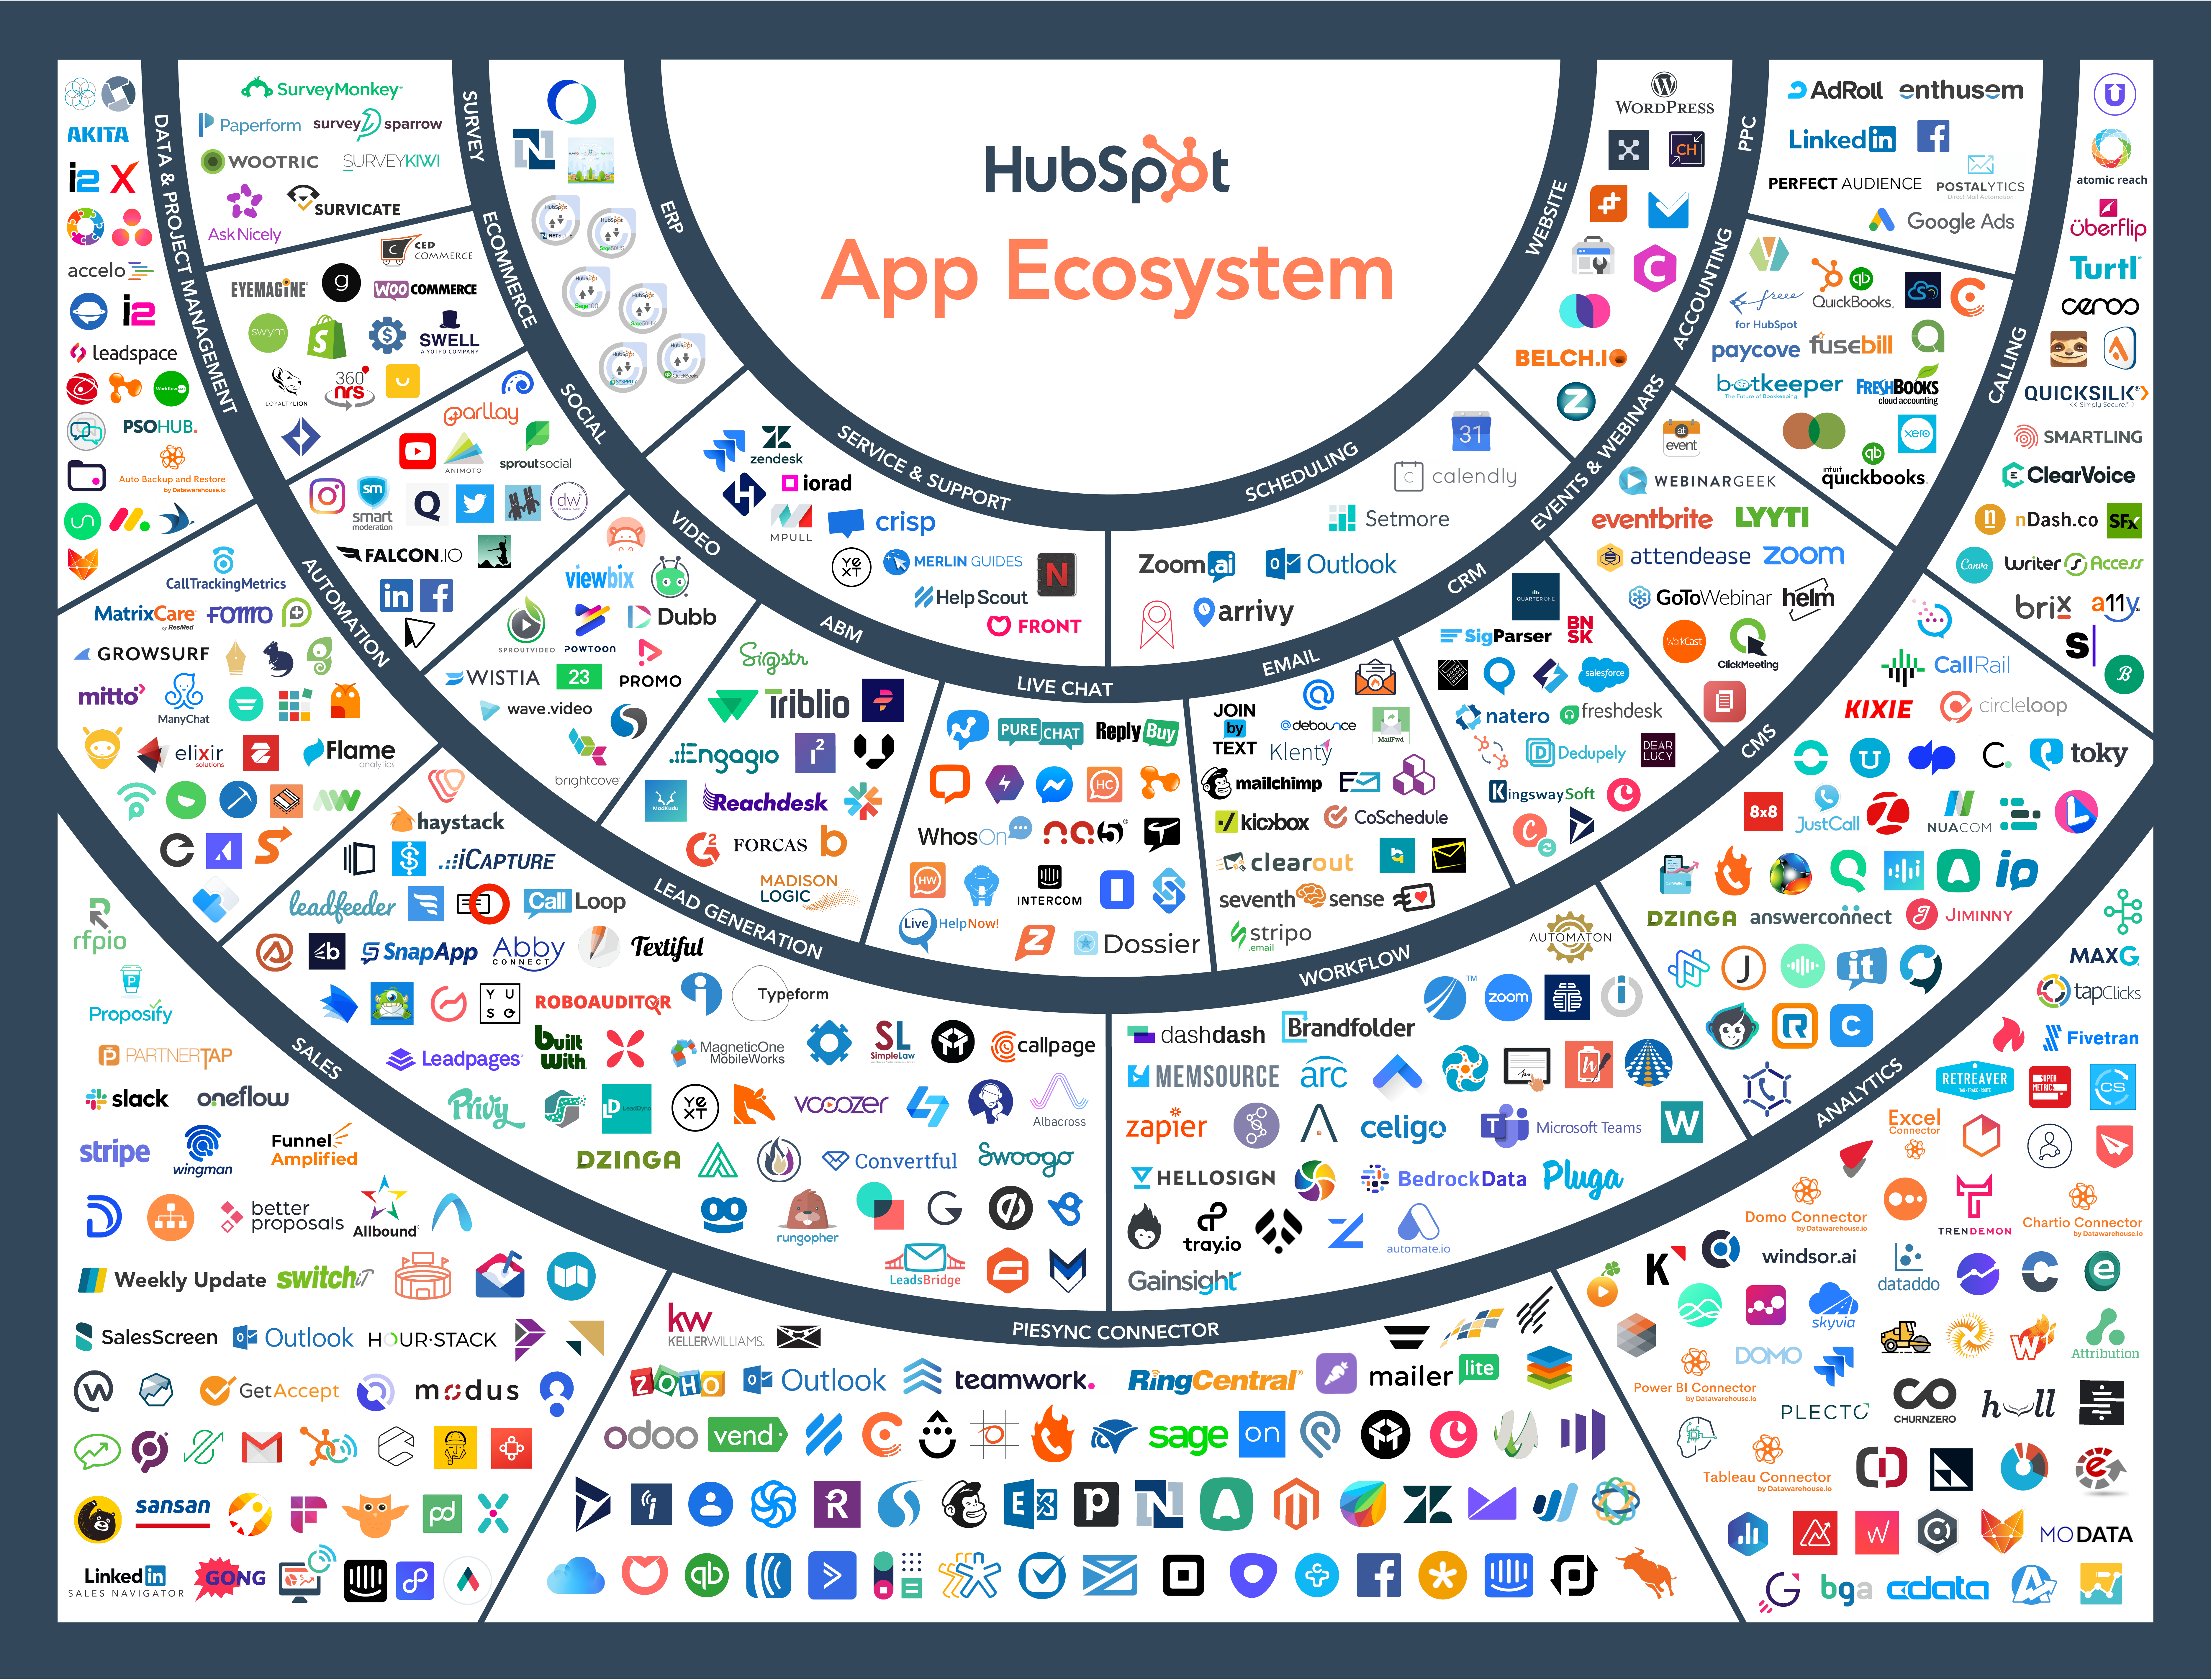 HubSpot Grows Platform Ecosystem to 500 Apps, Launches New Marketplace Functionality to Better Facilitate Customer Choice